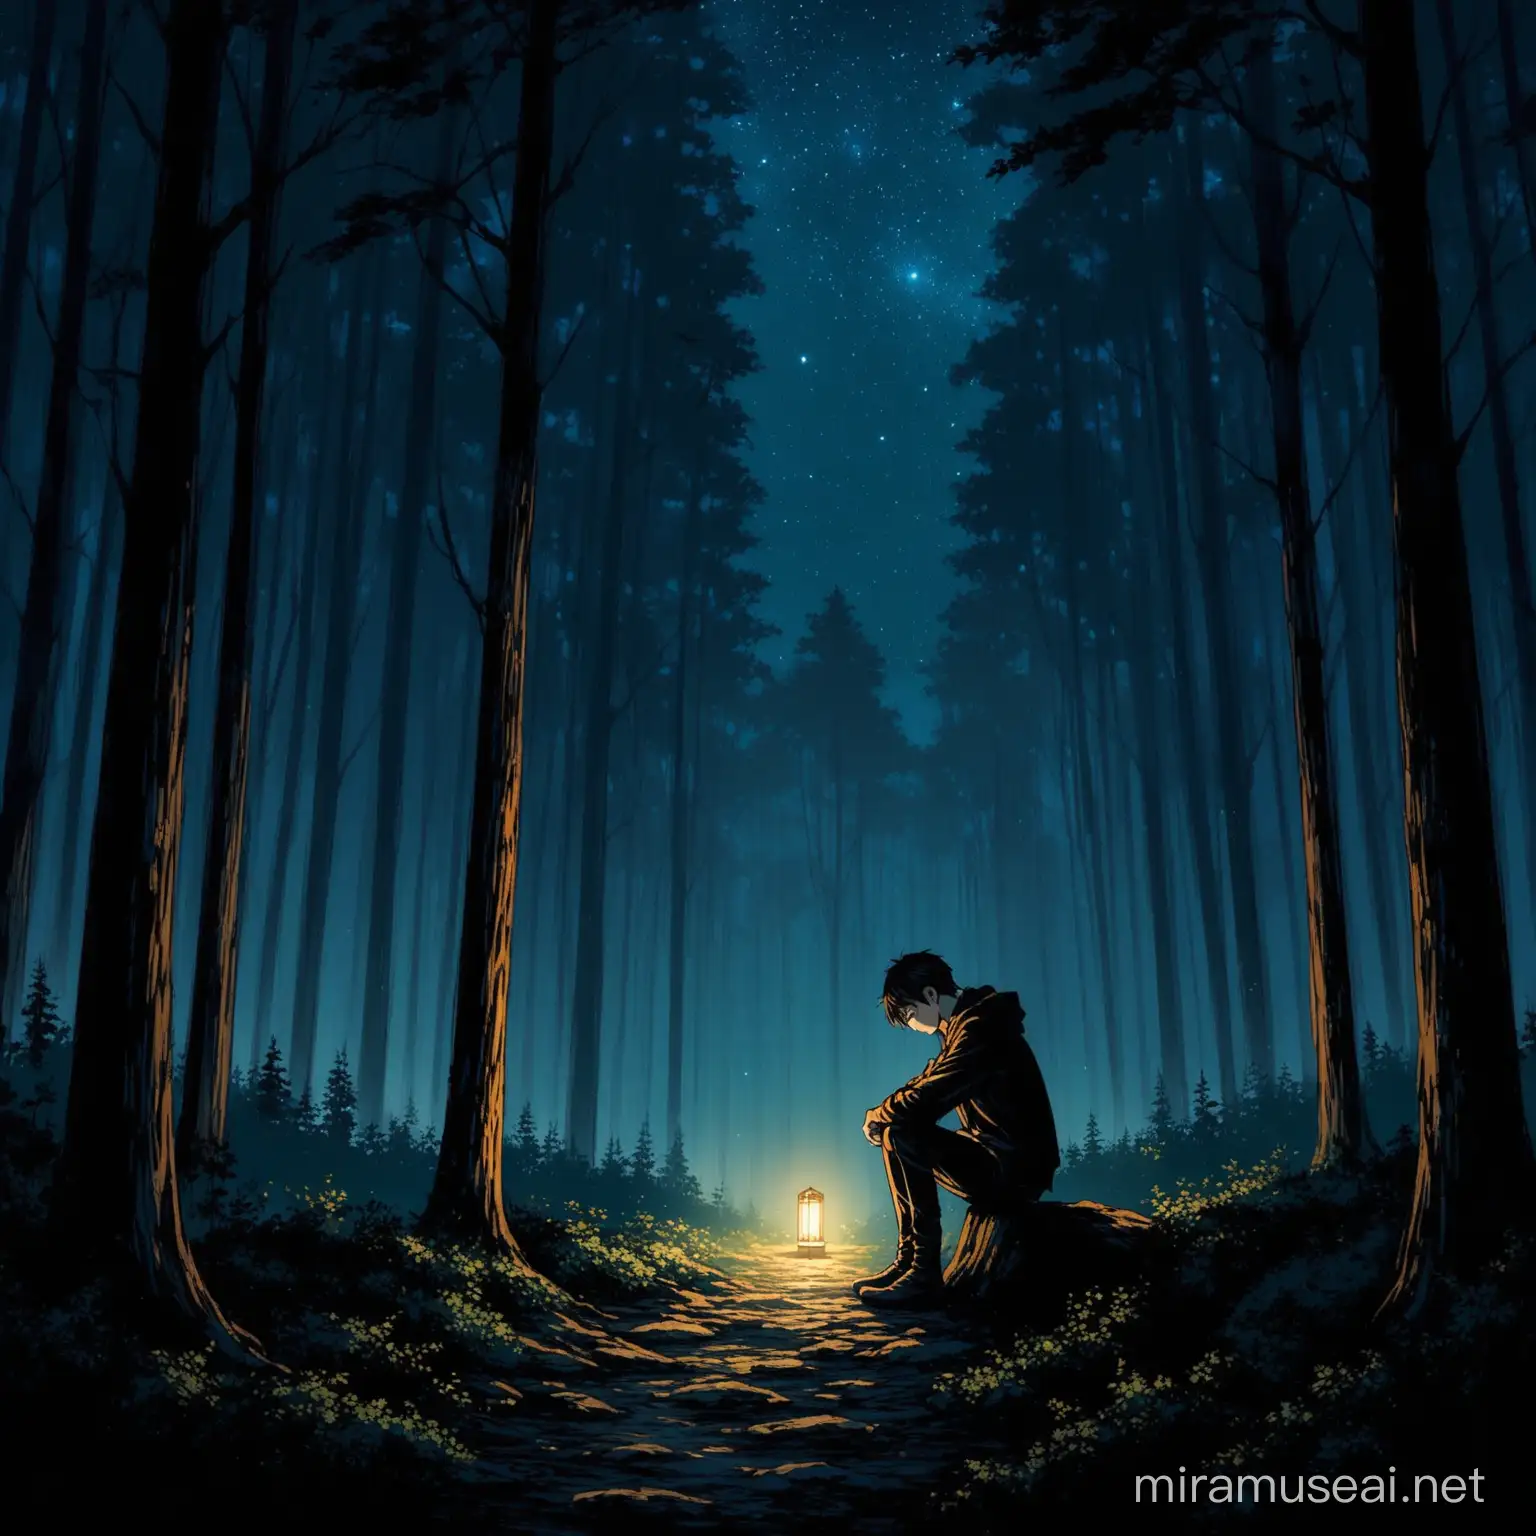 Lonely Man Reflecting in Dark Forest at Night